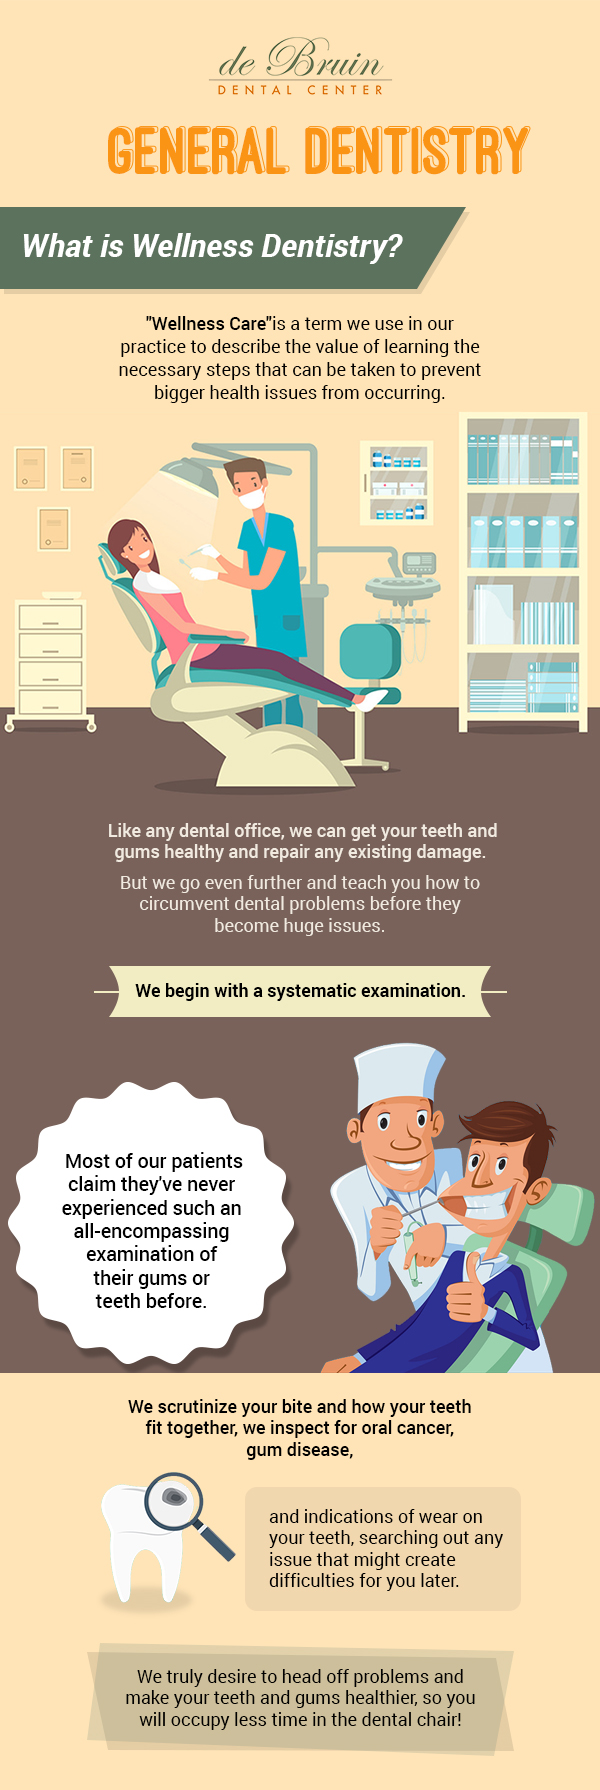 Achieve a Healthy Smile with General Dentistry Services from de Bruin Dental Center